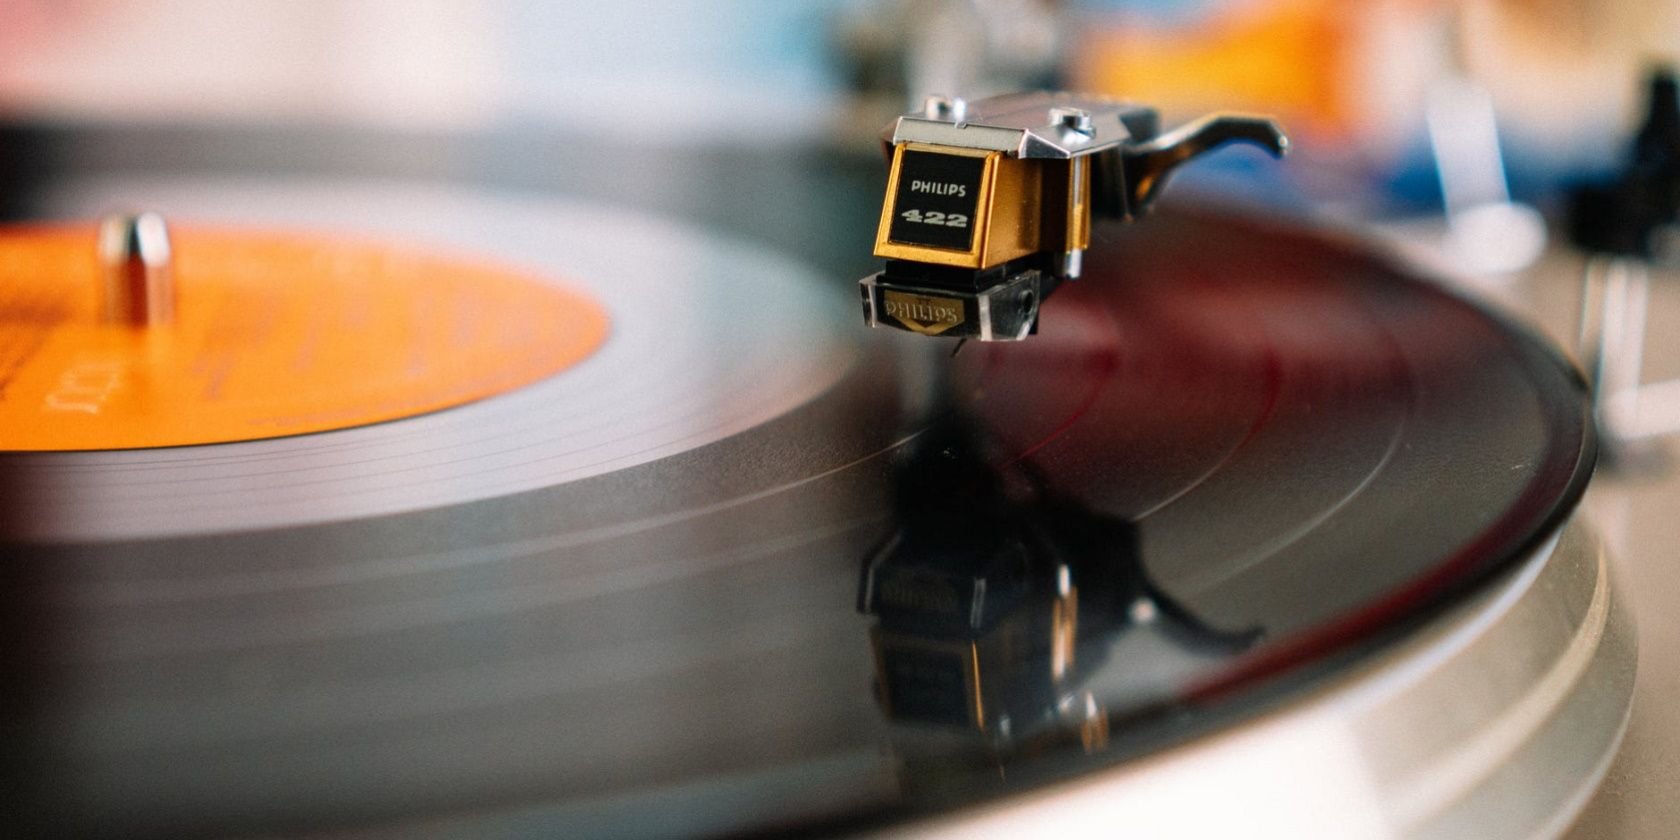 Vinyl Outsold CDs in 2020: What This Means for the Future of Music